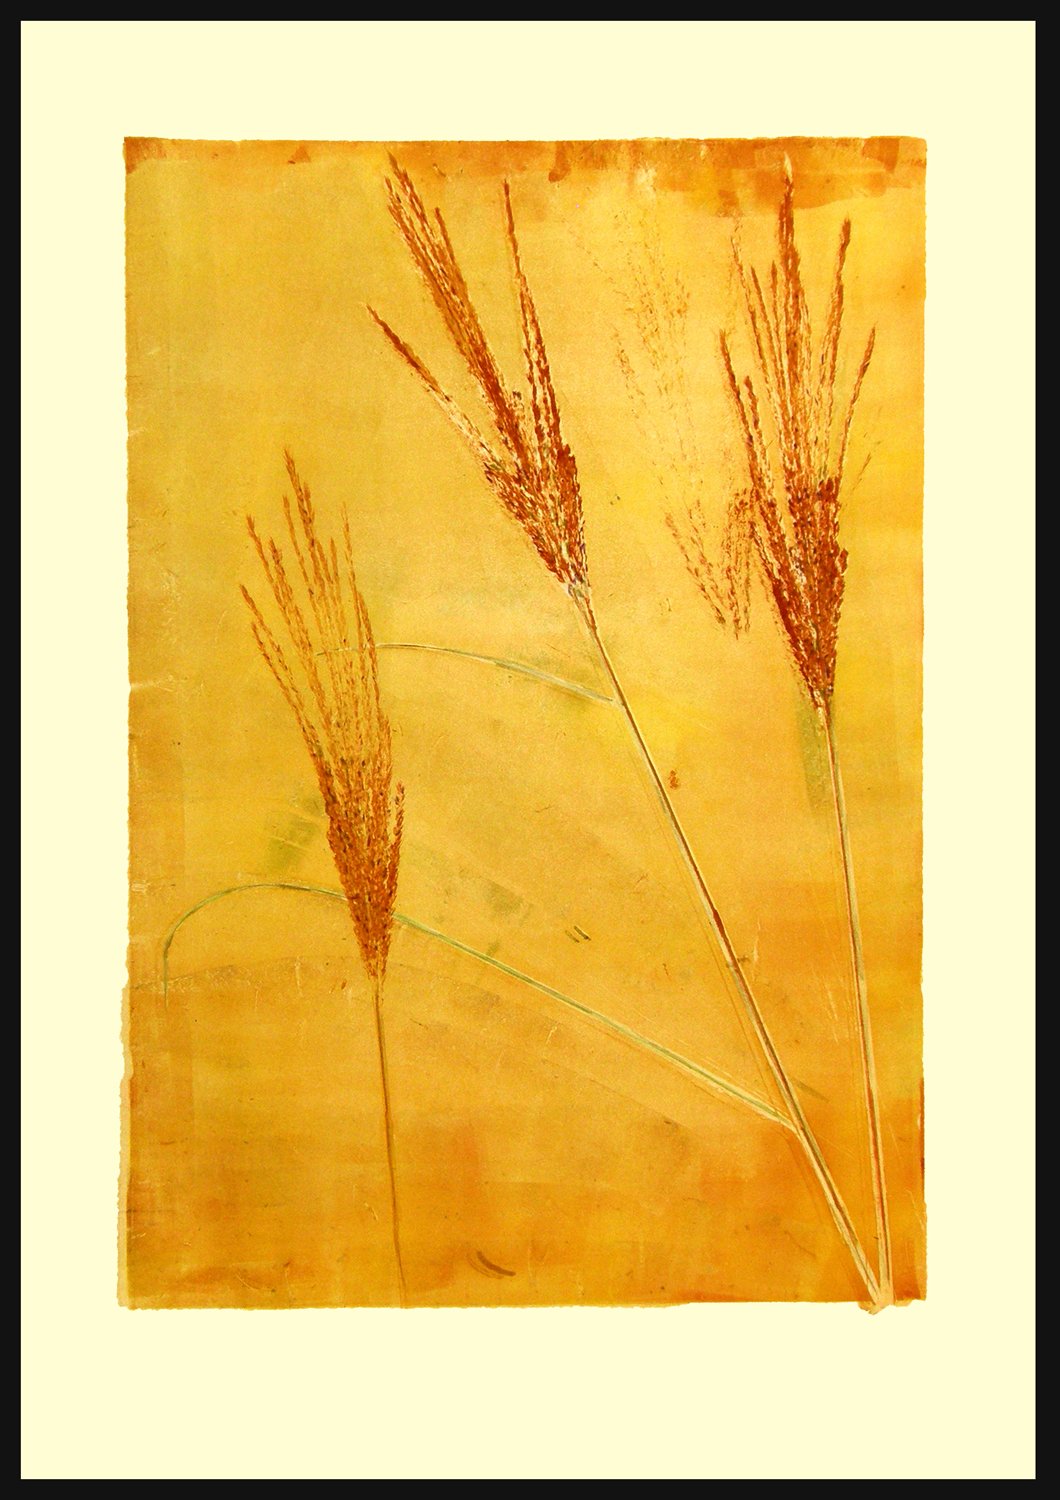  Inspired by the reeds dancing in the wind.   Wind Dancer    is enclosed and matted in a warm brown frame @ 29 x 23” Monotype 1/1   $485 - SOLD  